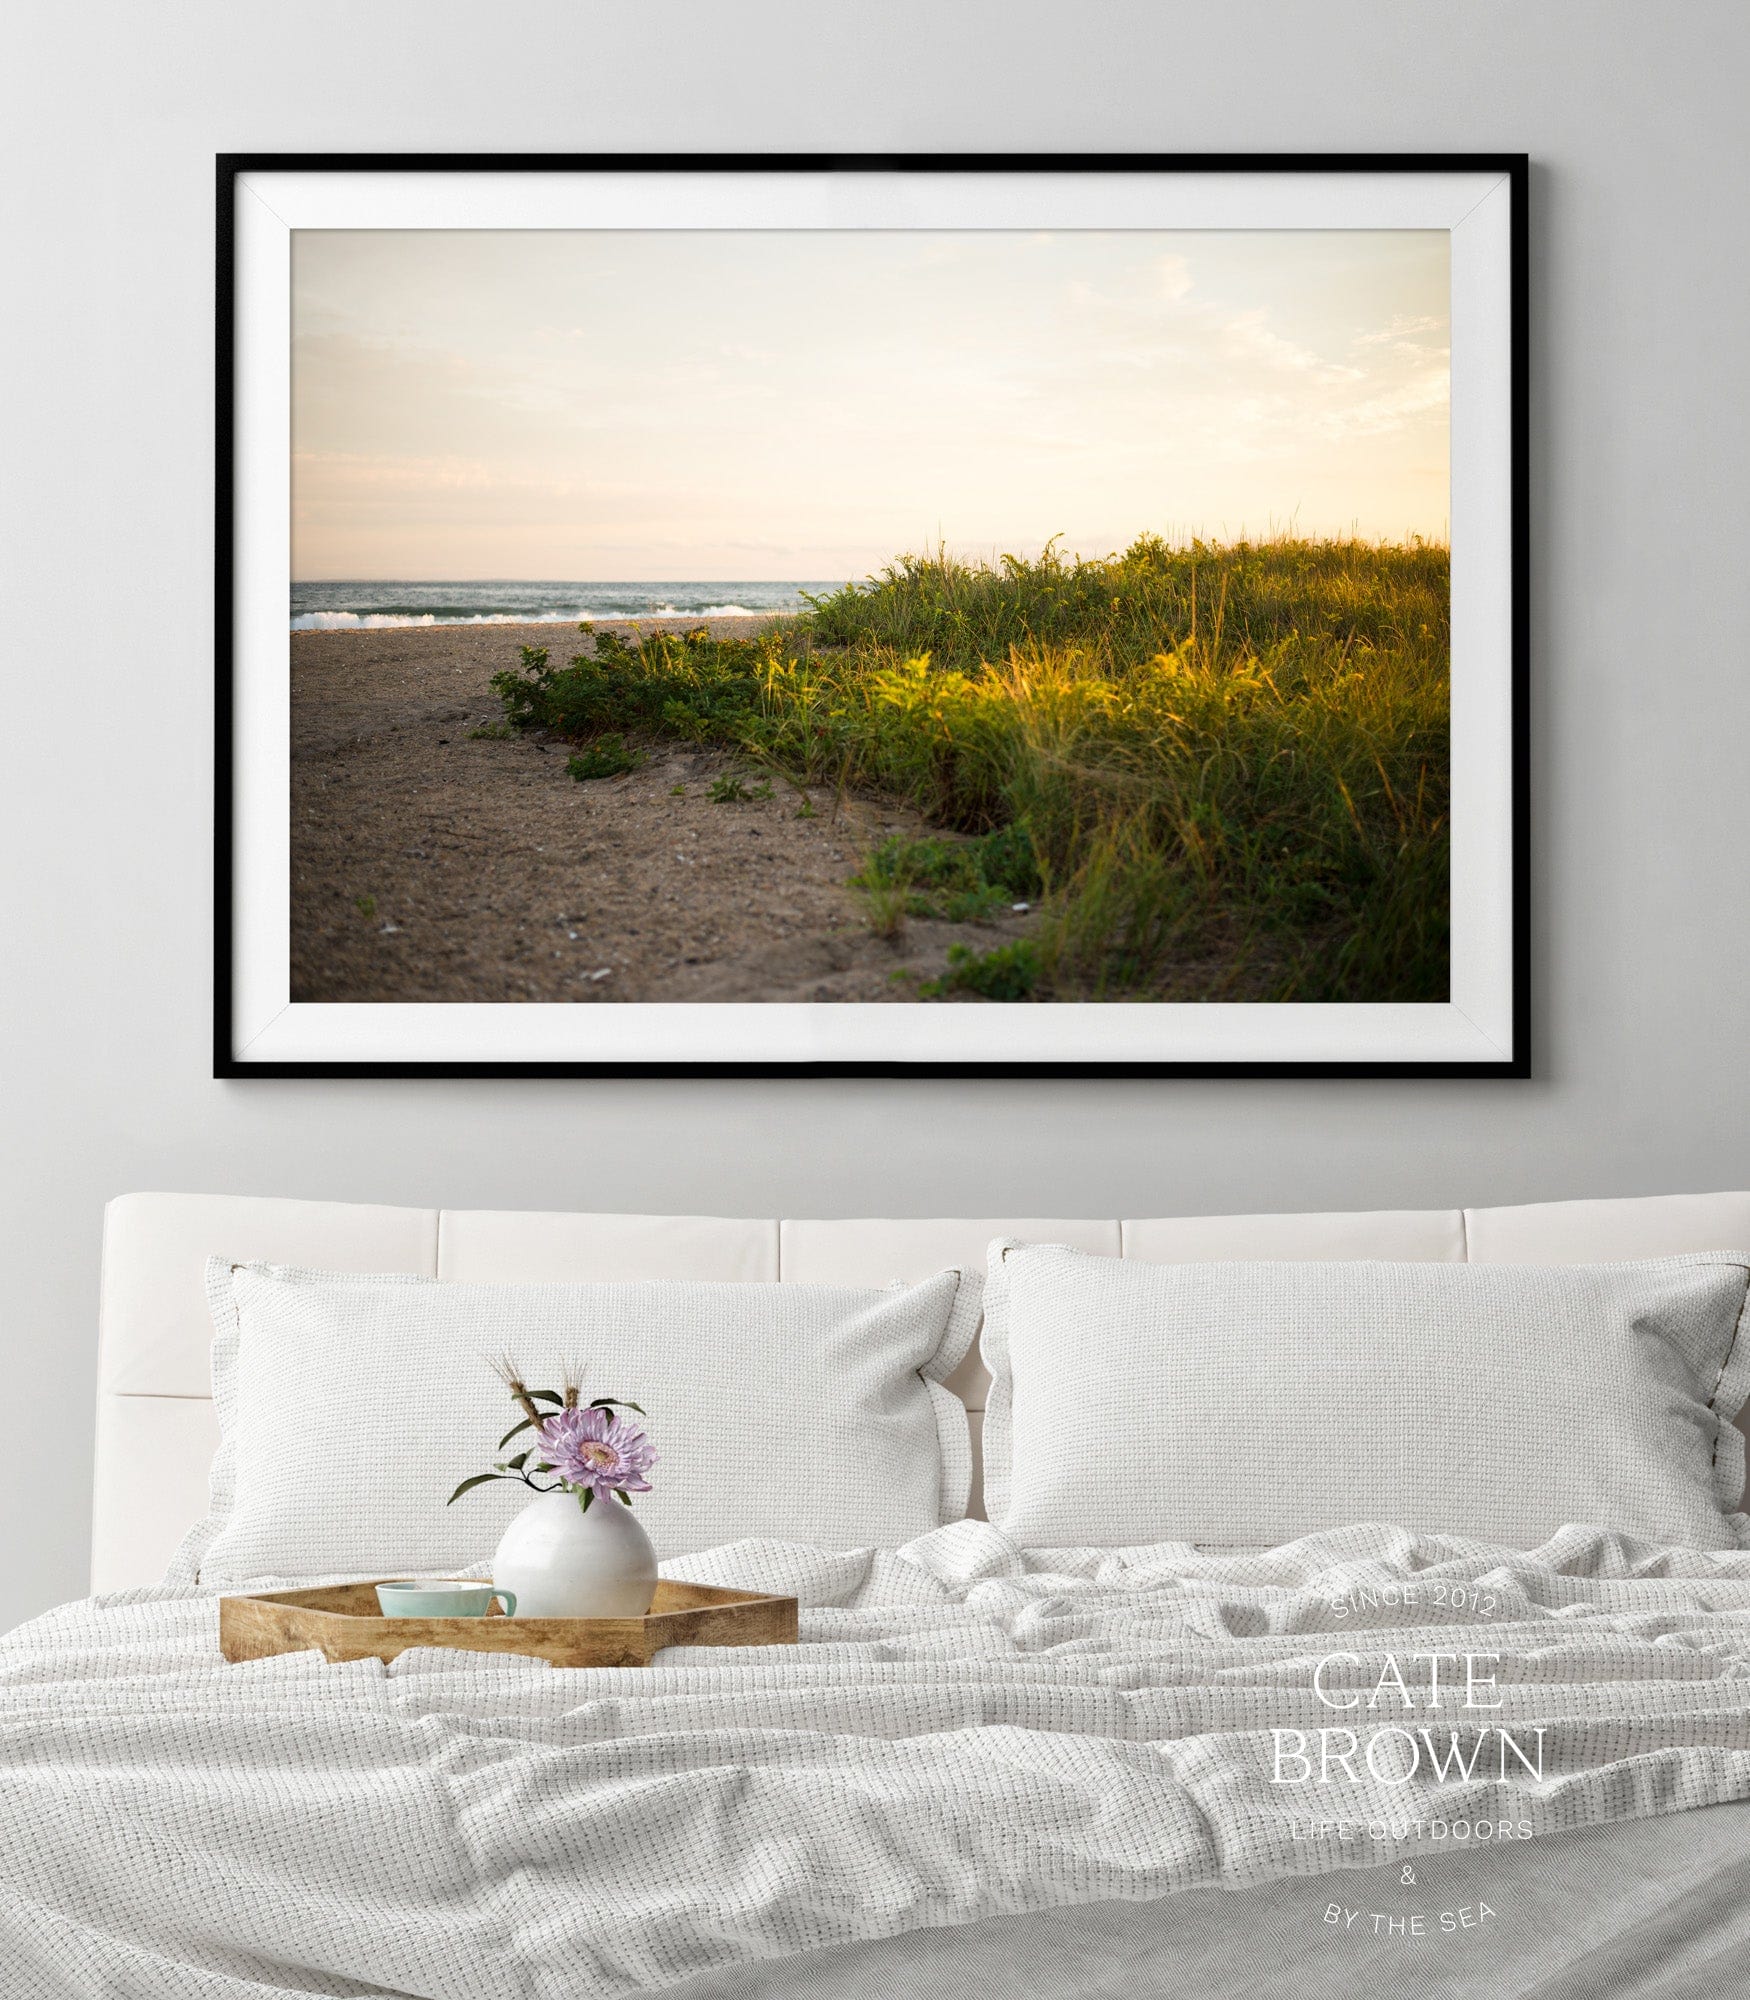 Cate Brown Photo Fine Art Print / 8"x12" / None (Print Only) East Matunuck at Golden Hour  //  Landscape Photography Made to Order Ocean Fine Art